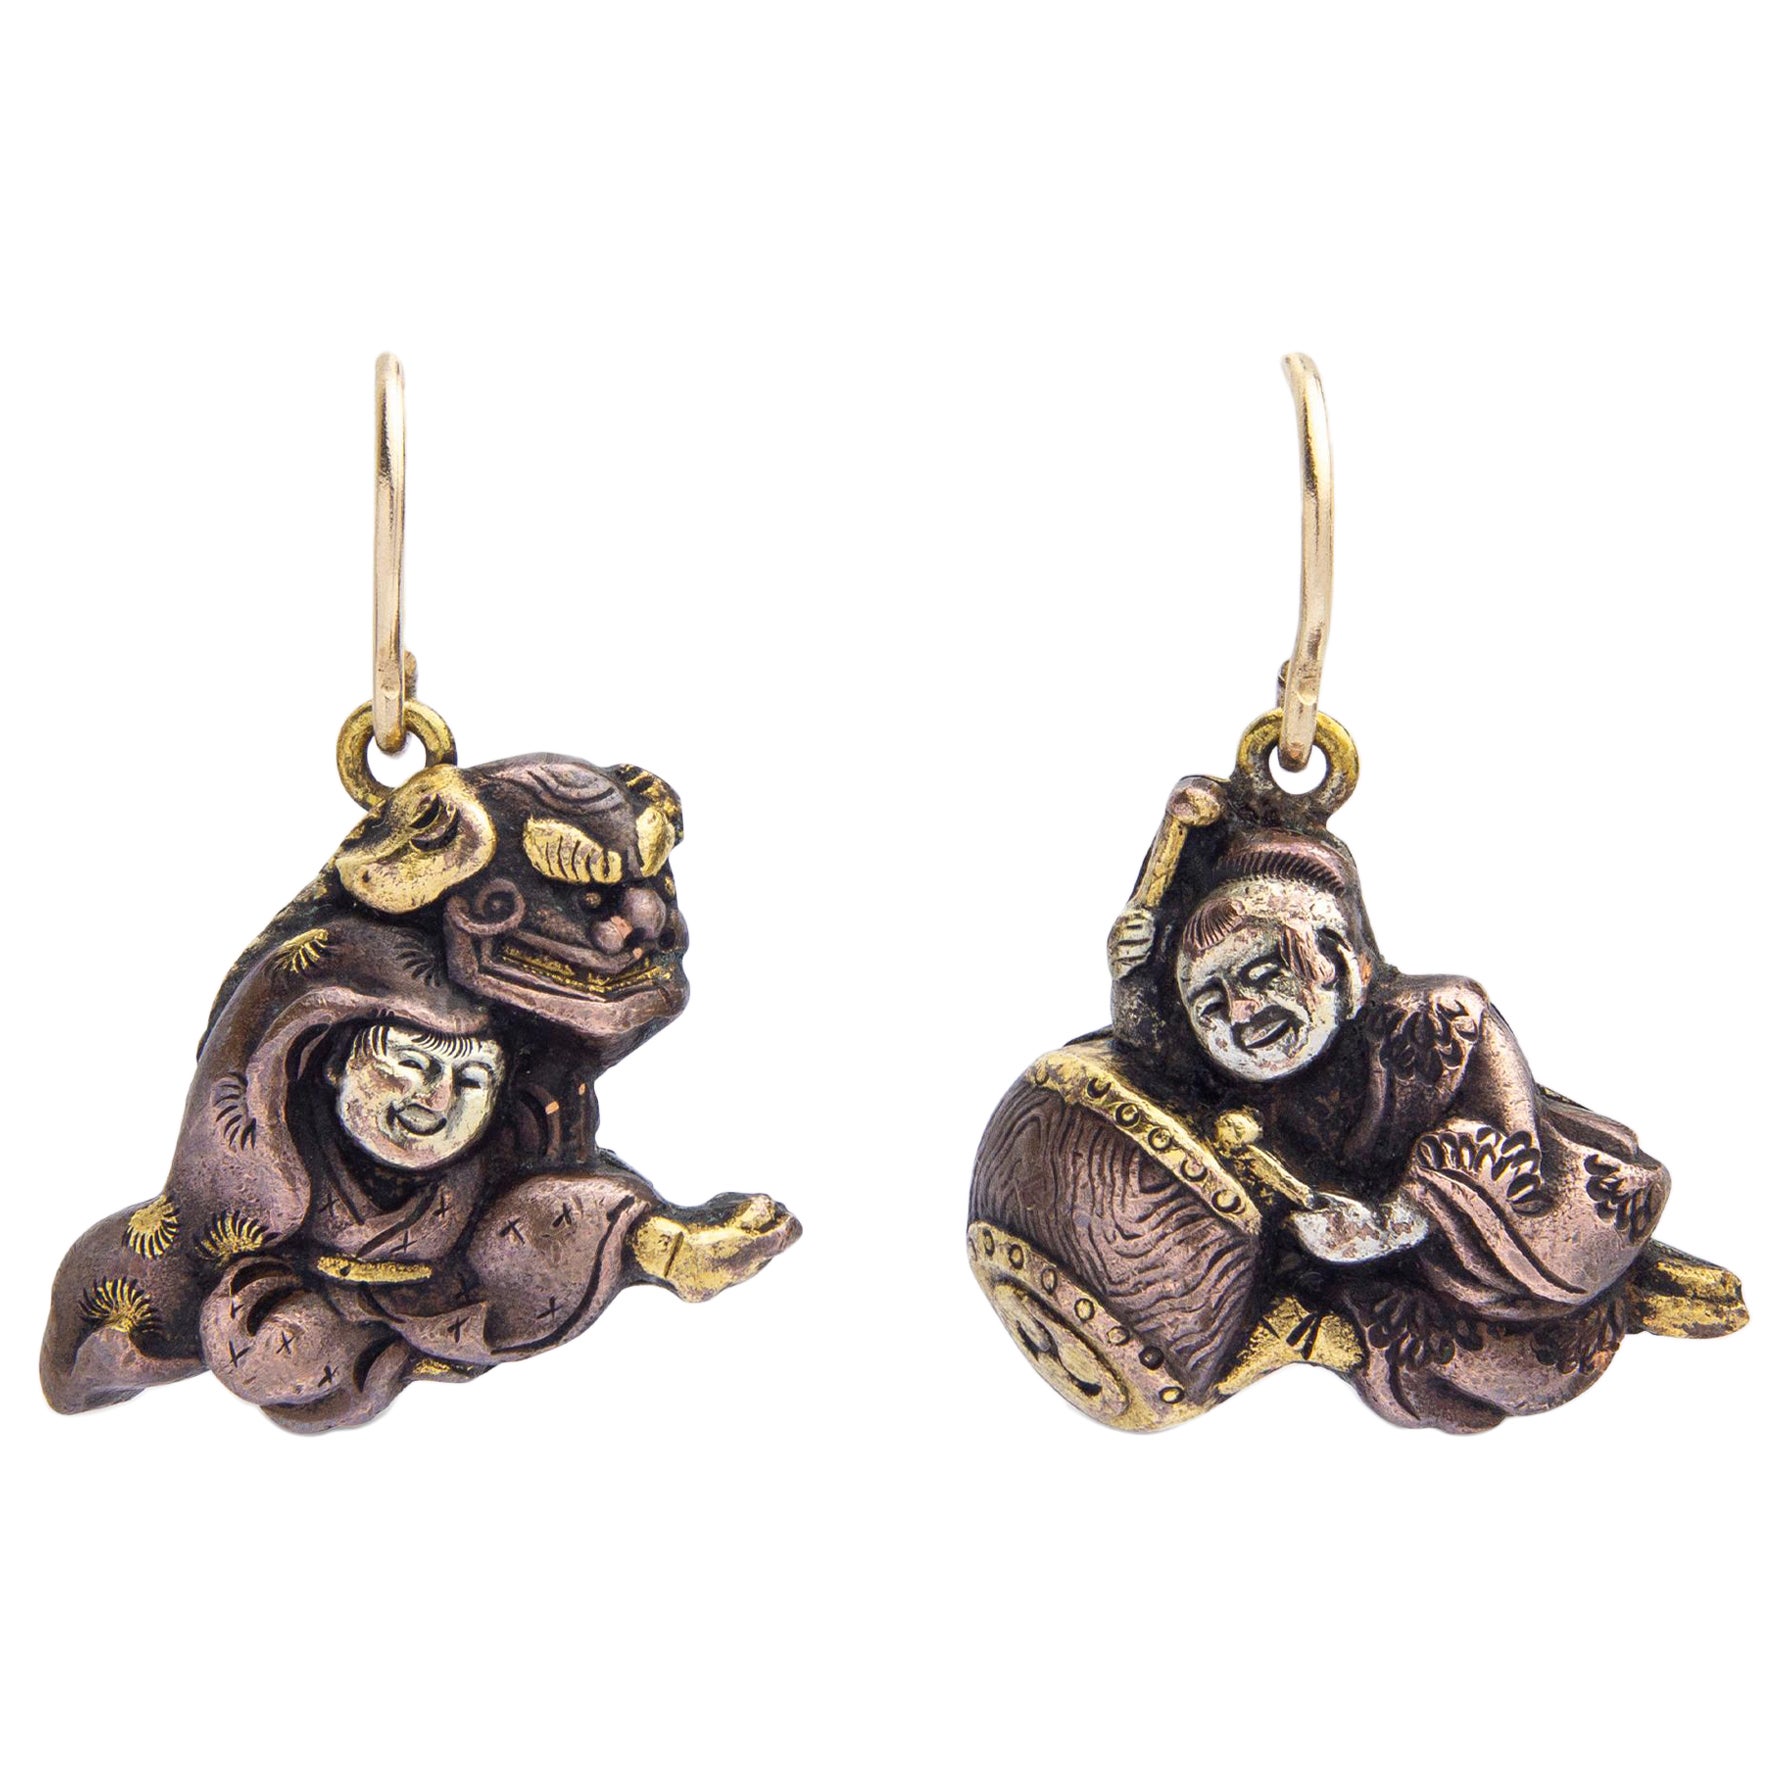 A Pair of Japanese Shakudo Plaque Earrings